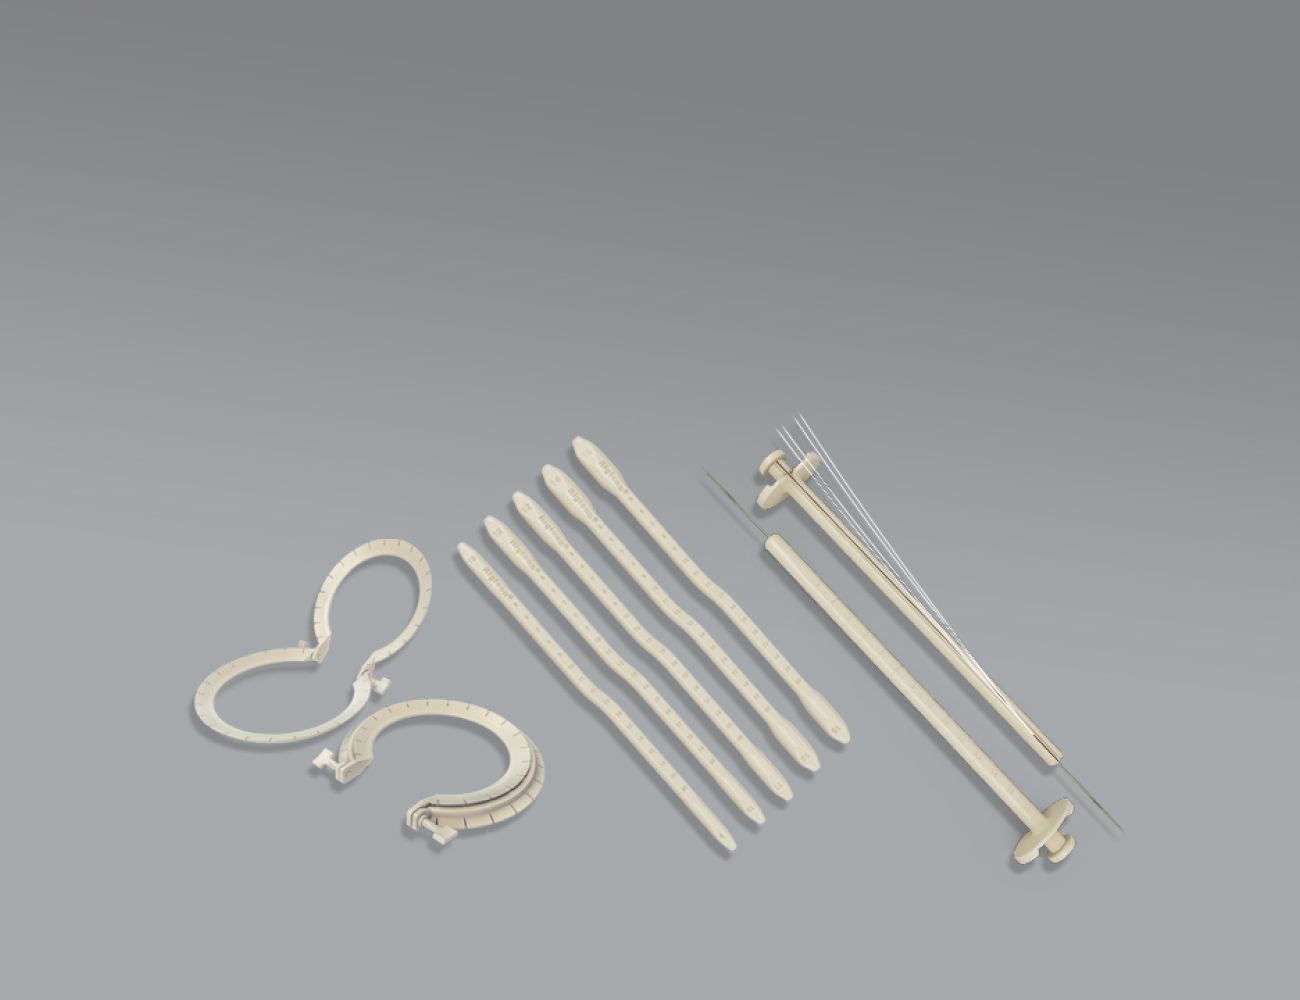 Single-Use Surgical Instruments